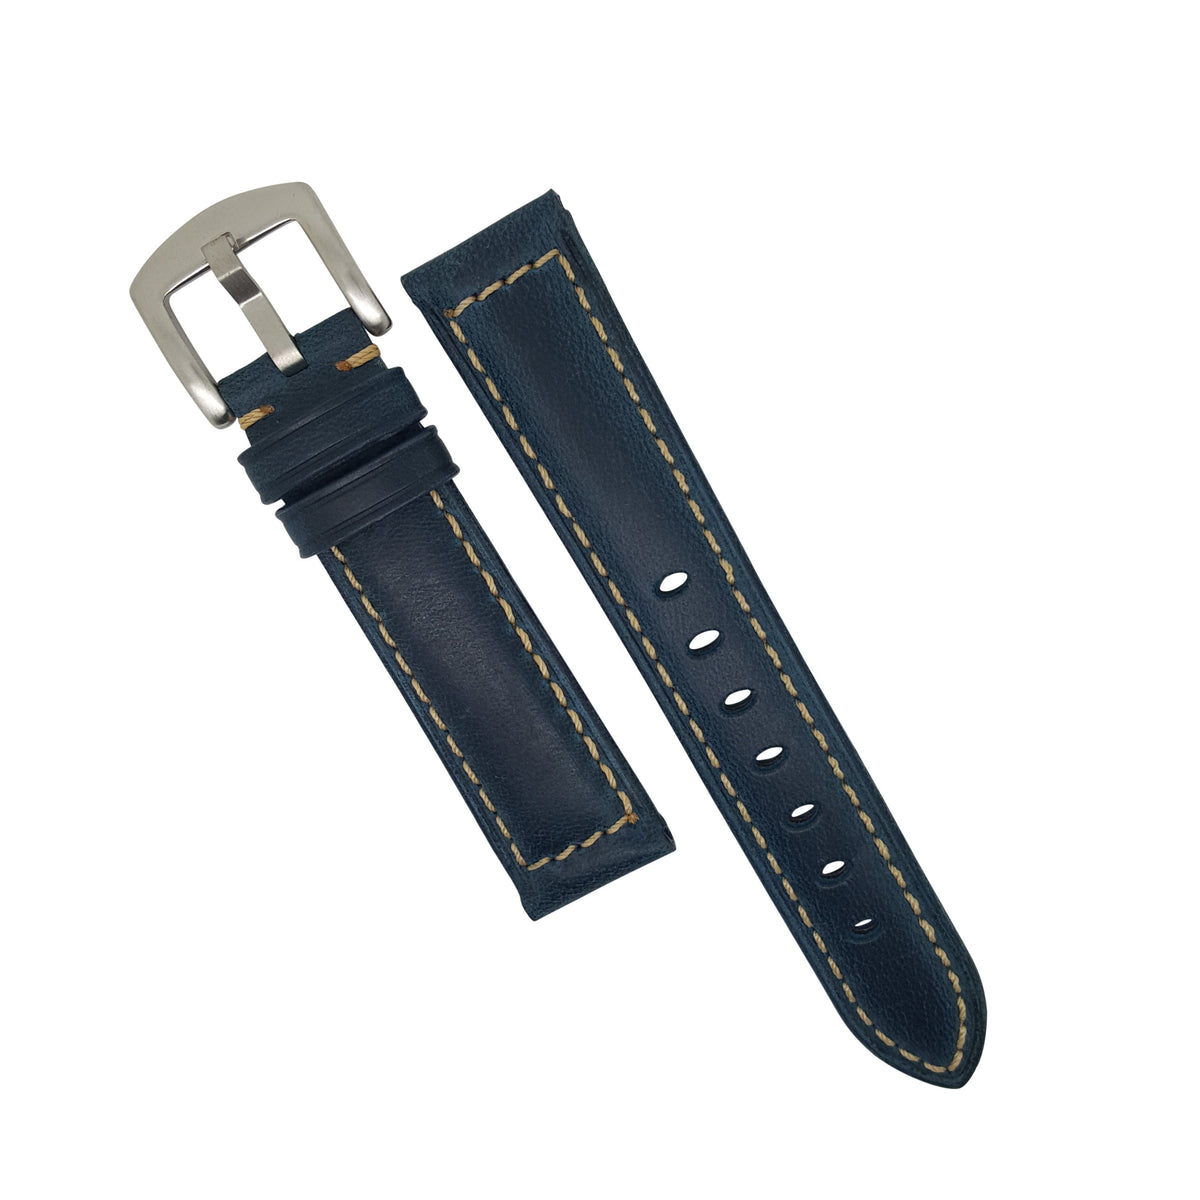 M2 Oil Waxed Leather Watch Strap in Navy with Silver Buckle (20mm) - Nomad Watch Works Malaysia